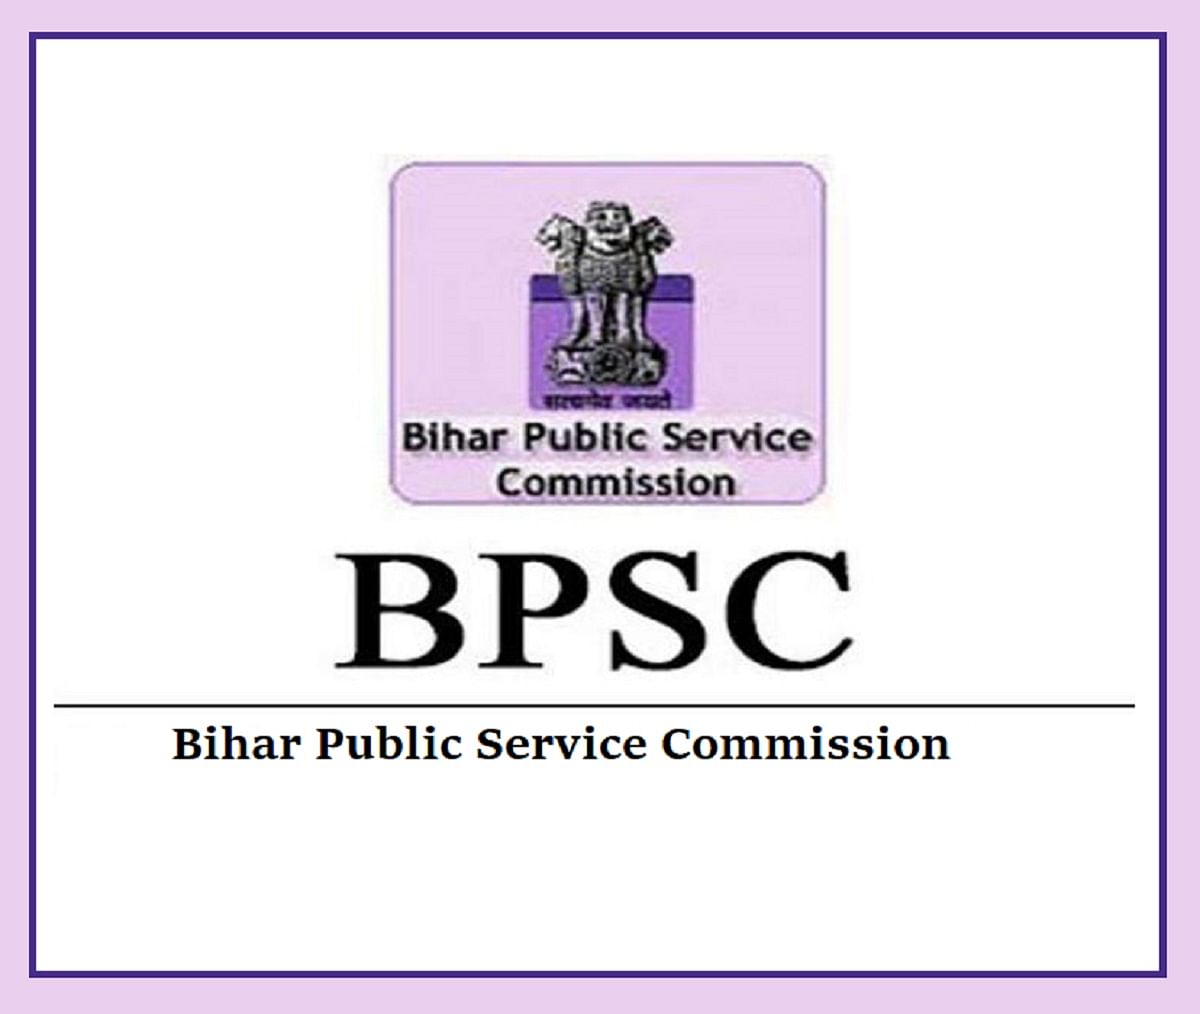 BPSC 67th Application Form 2021 Correction Window Closes Today, Steps to Make Changes Here